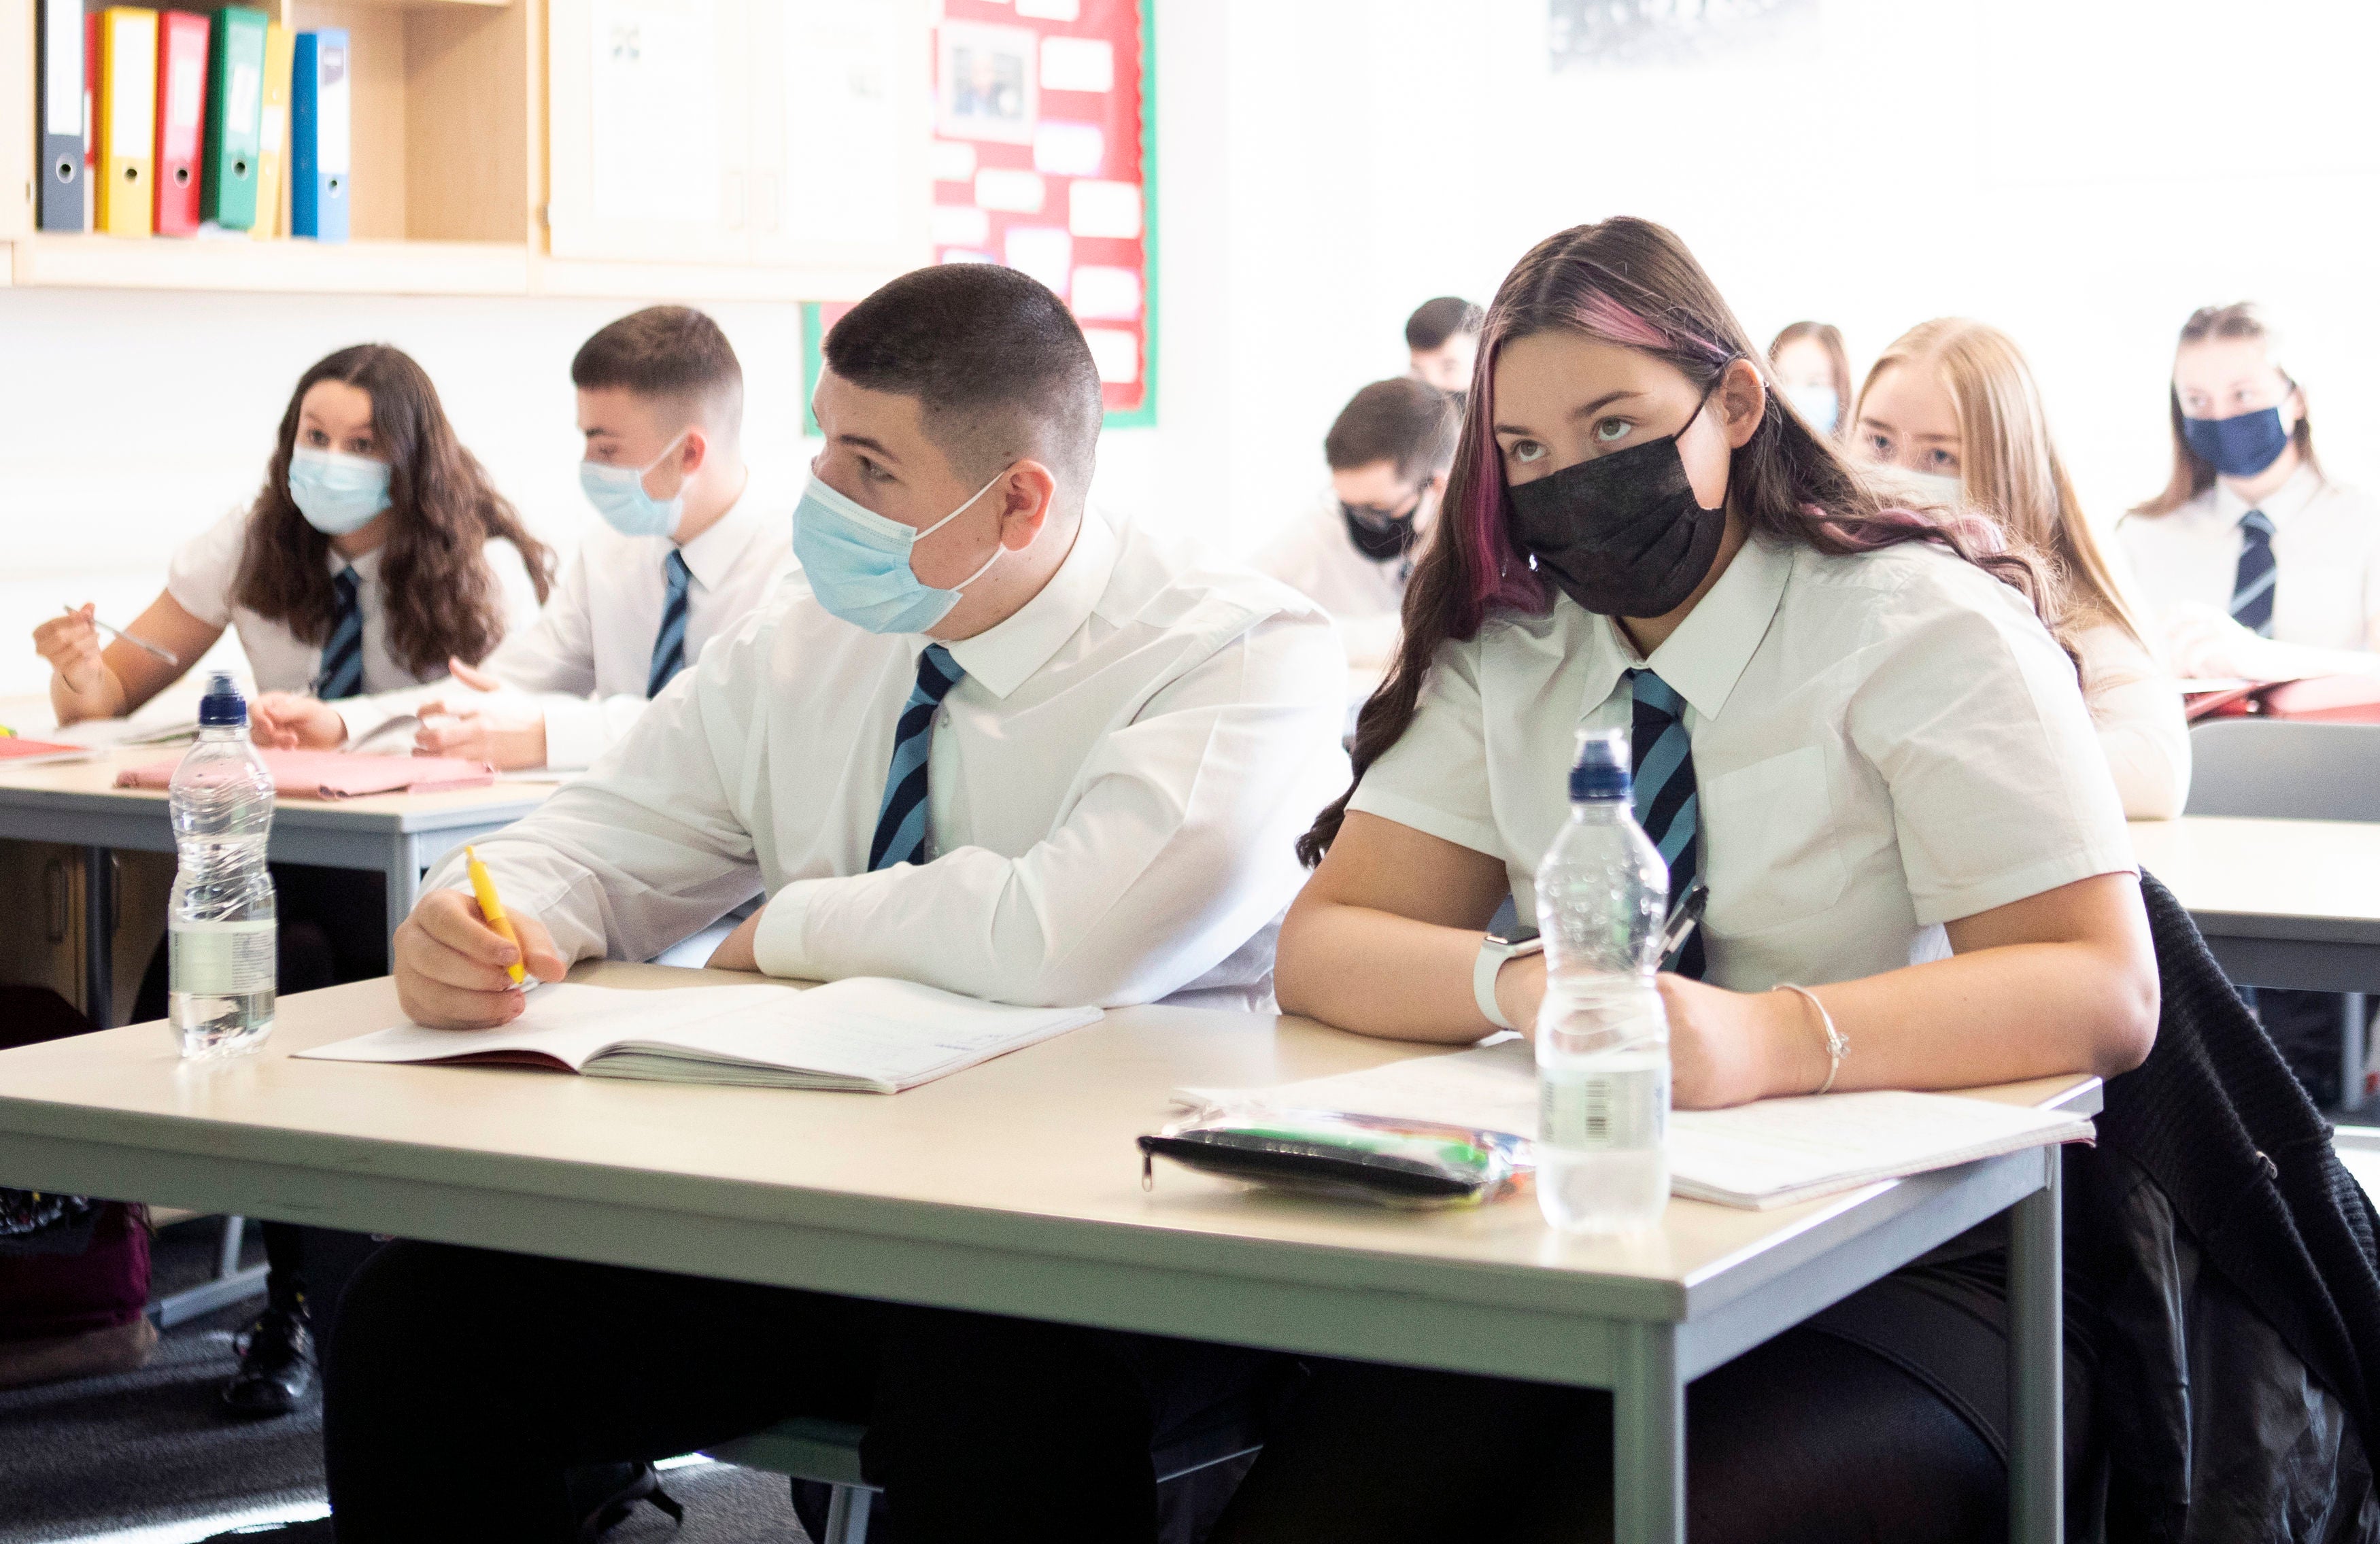 Pupils wear face masks at a school in Scotland